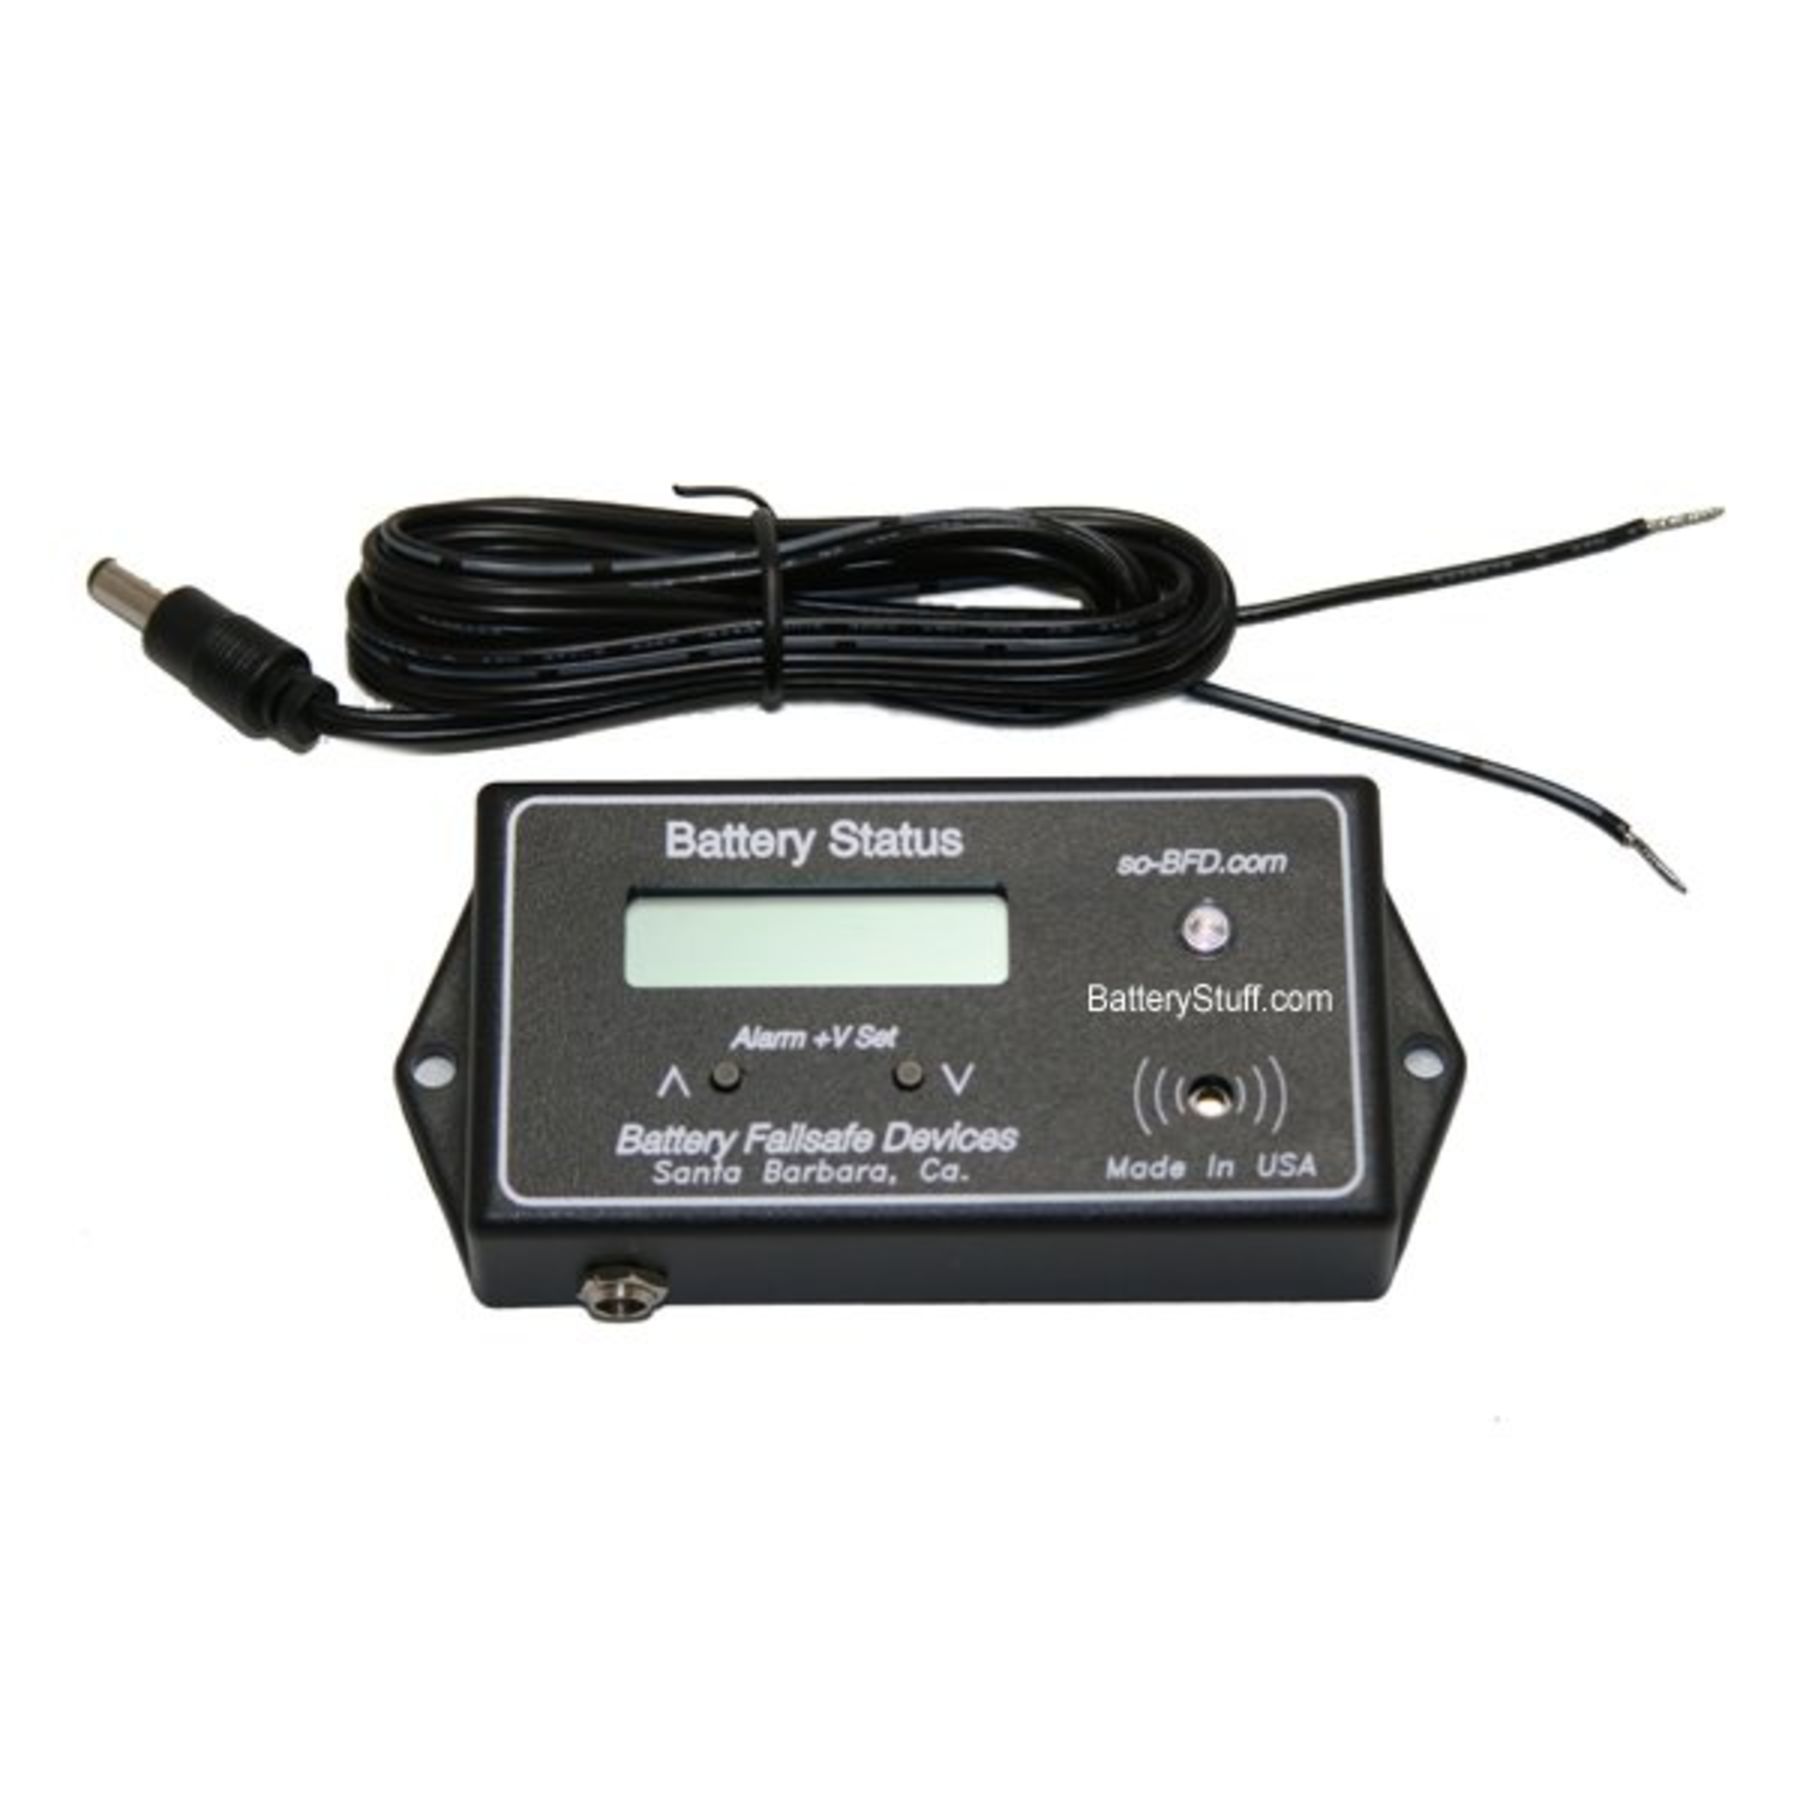 12/24v Low Battery Low Voltage Alarm with LCD Display